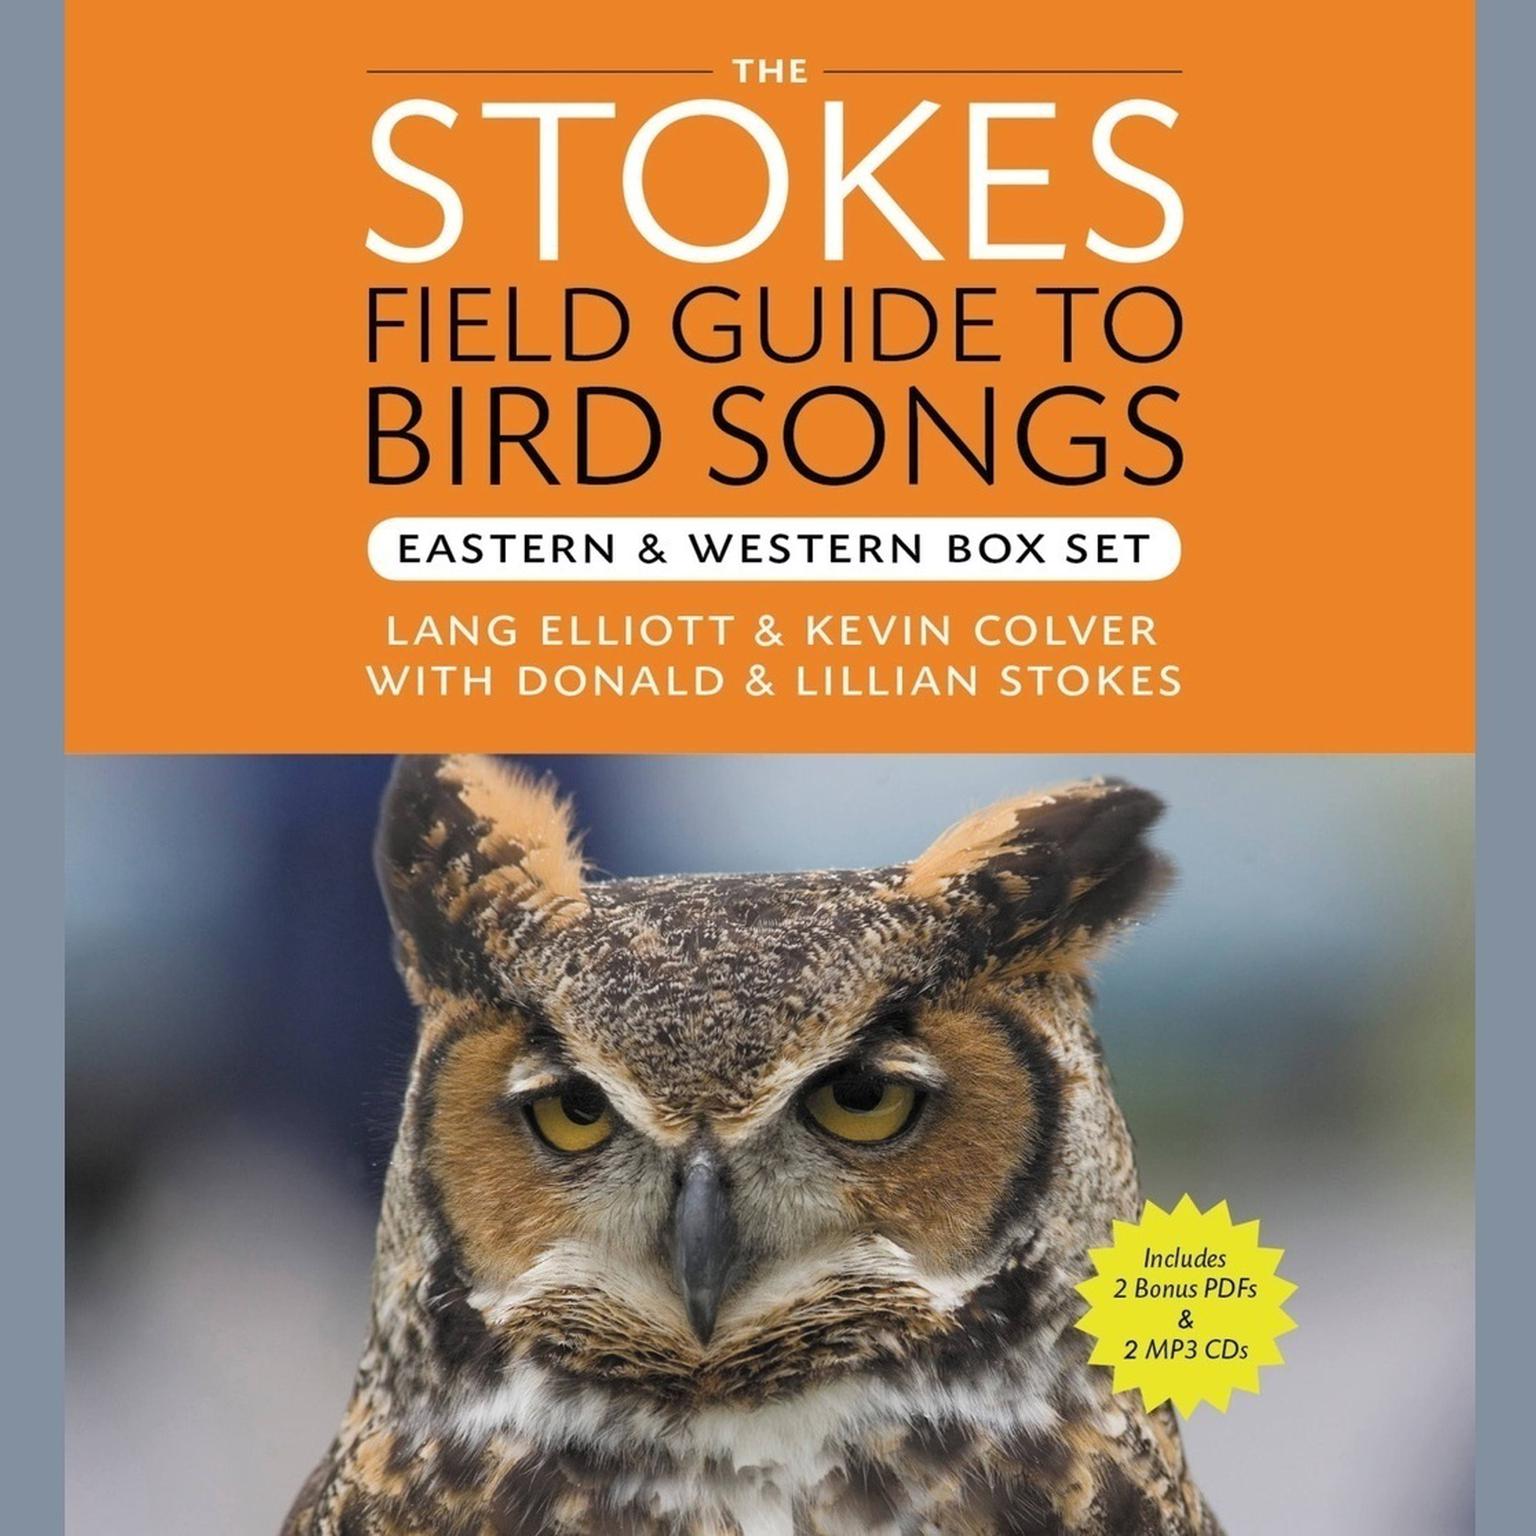 The Stokes Field Guide to Bird Songs: Eastern and Western Box Set: Eastern and Western Box Set Audiobook, by Donald Stokes